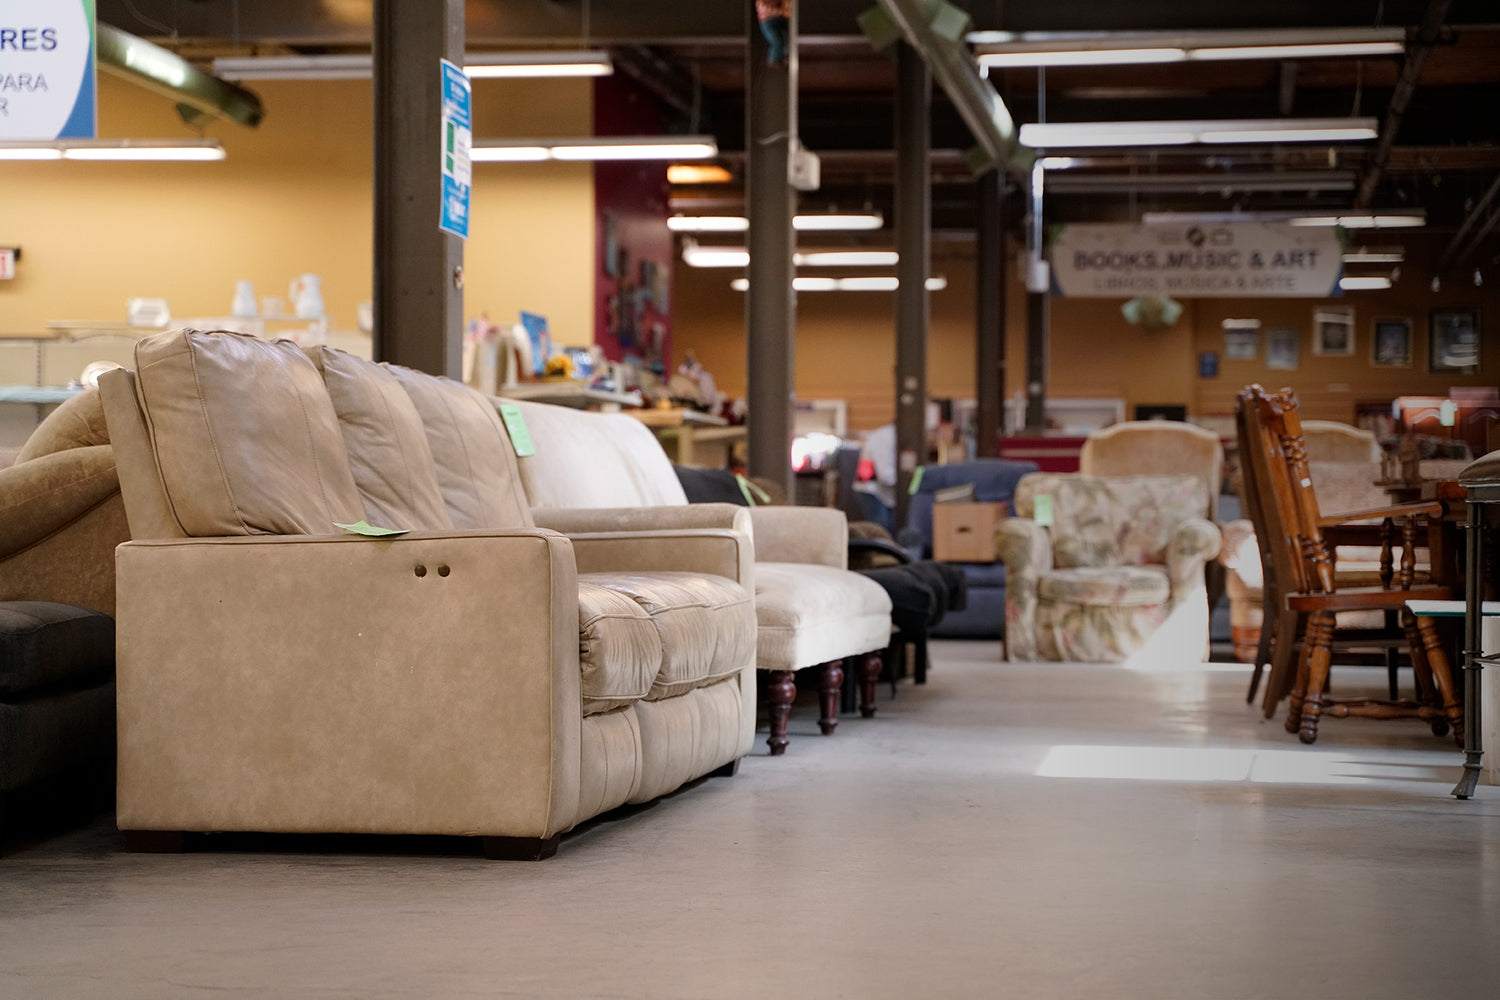 A cream colored leather couch in the Asheville ReStore's upper showroom. Behind it is the bookstore, containing books, music, and art.